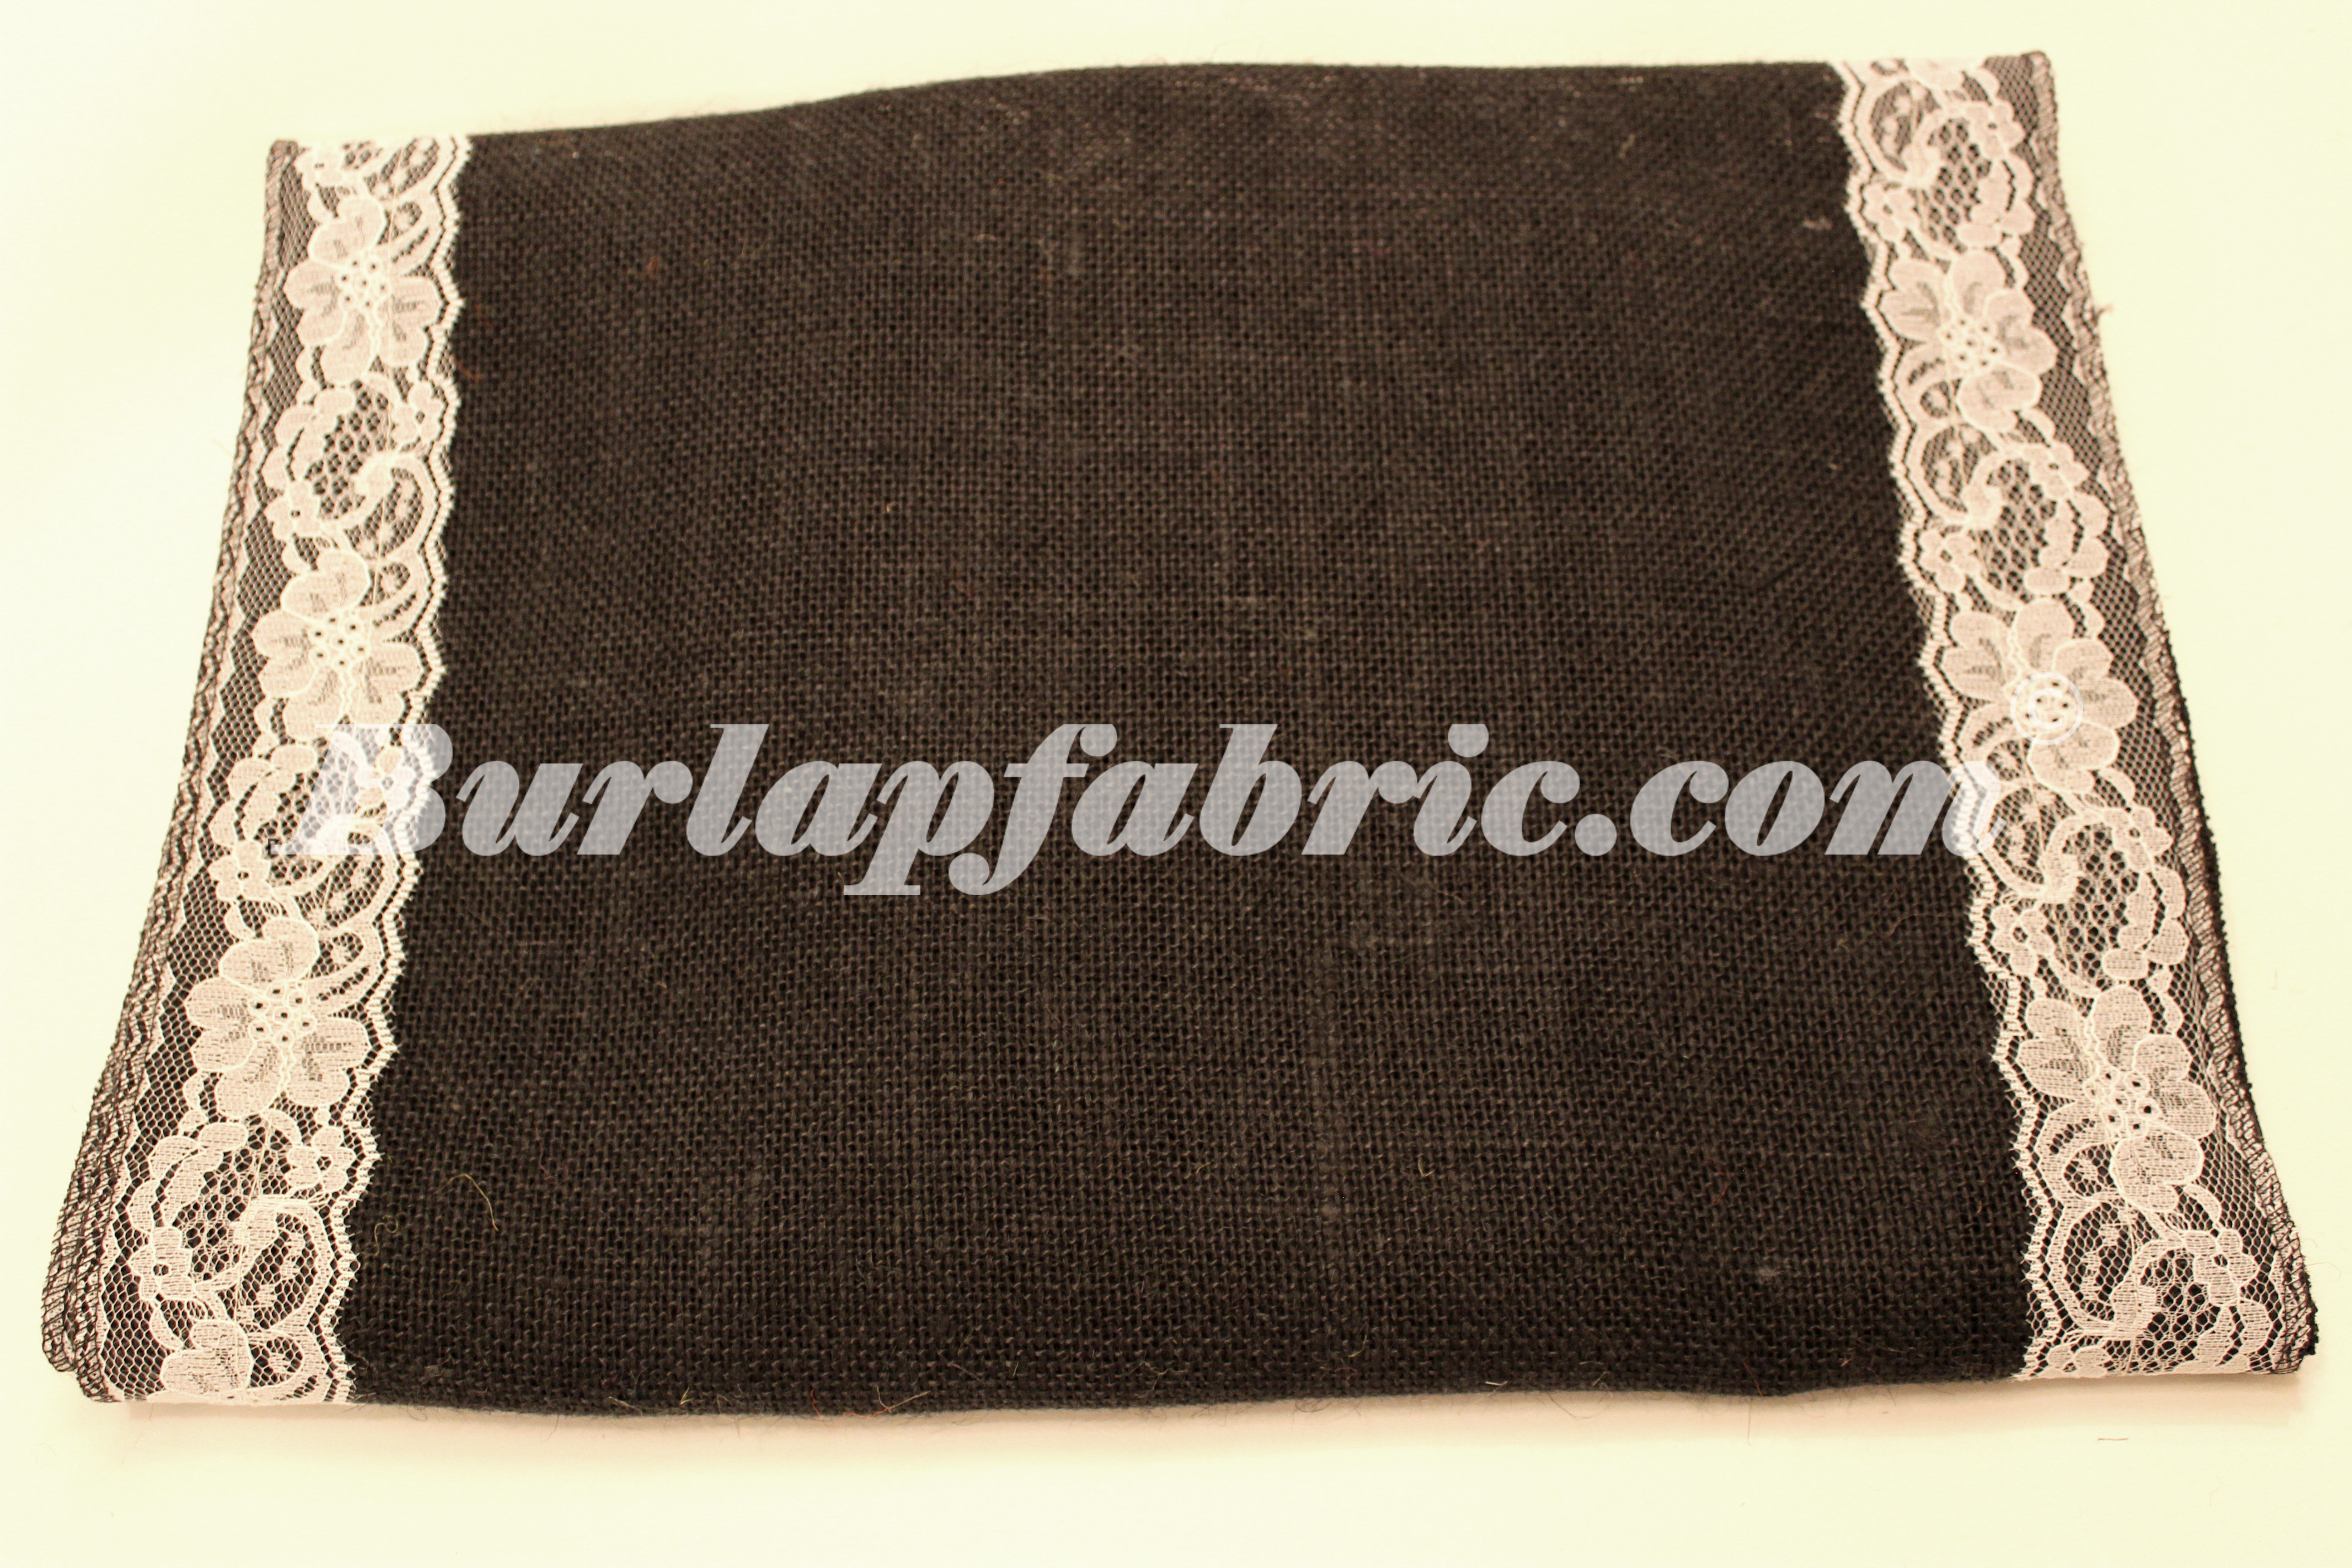 14" Black Burlap Runner with 2" White Lace Borders